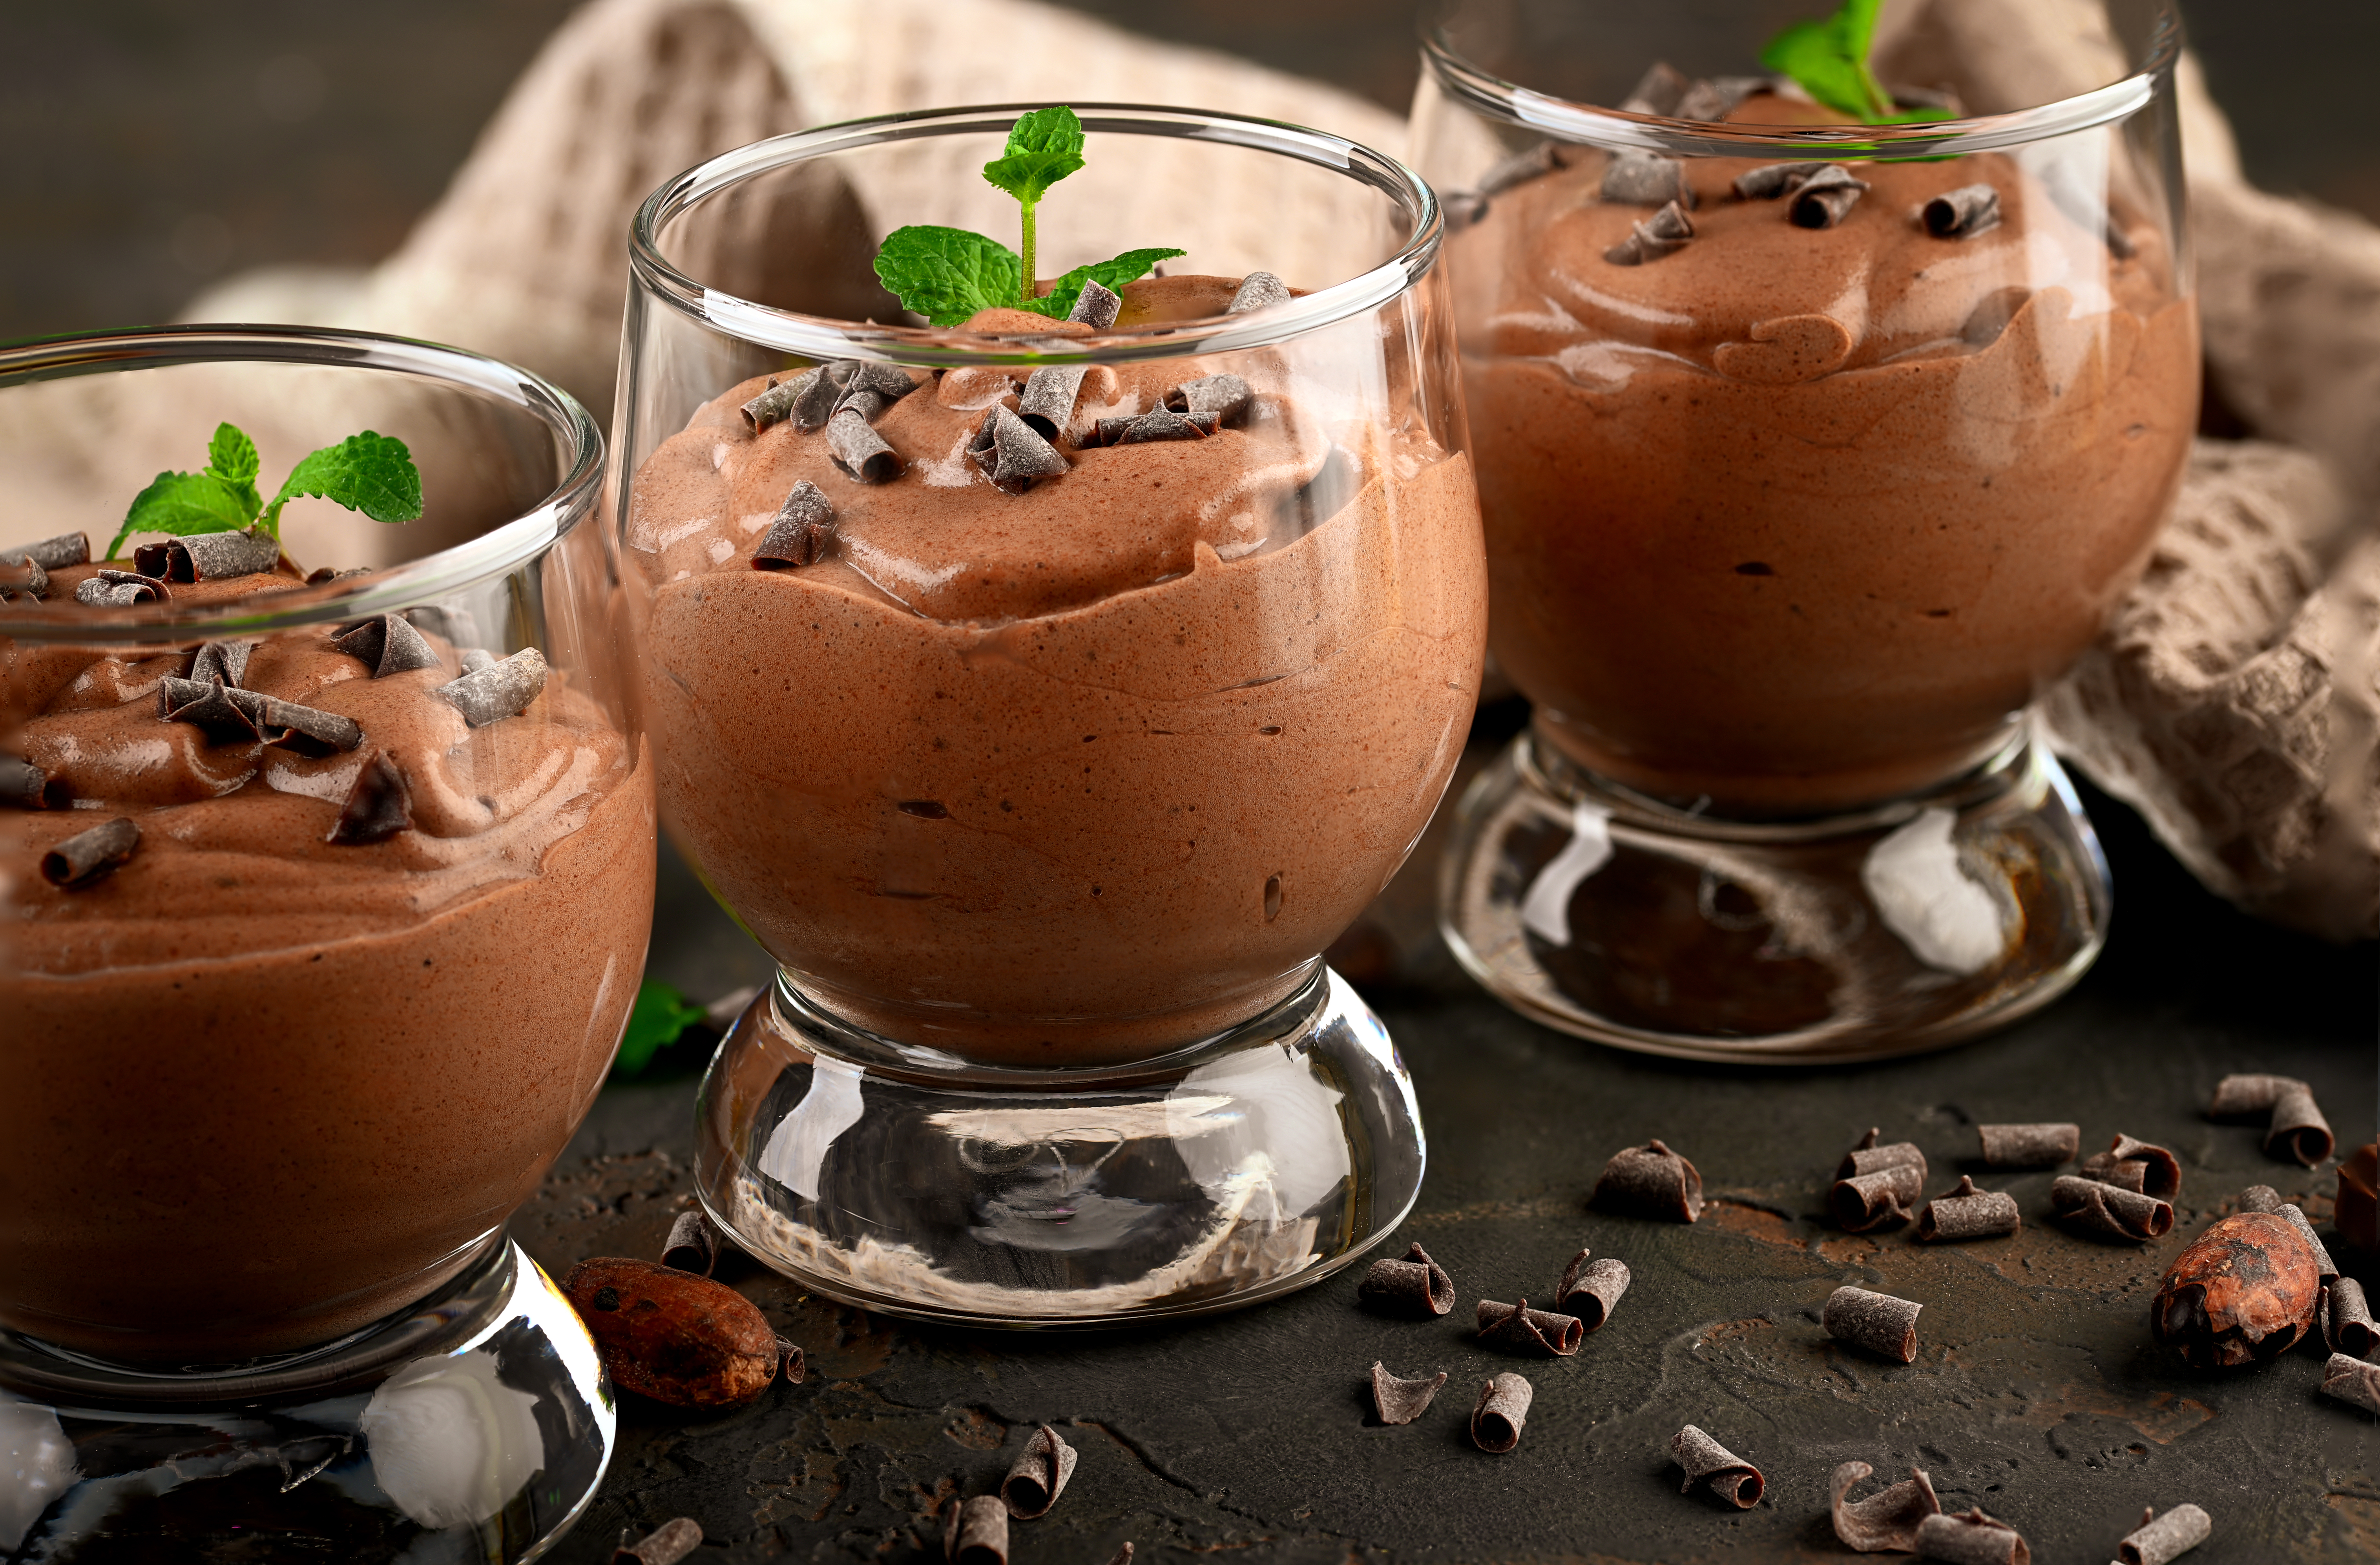 Header image of chocolate mousse.